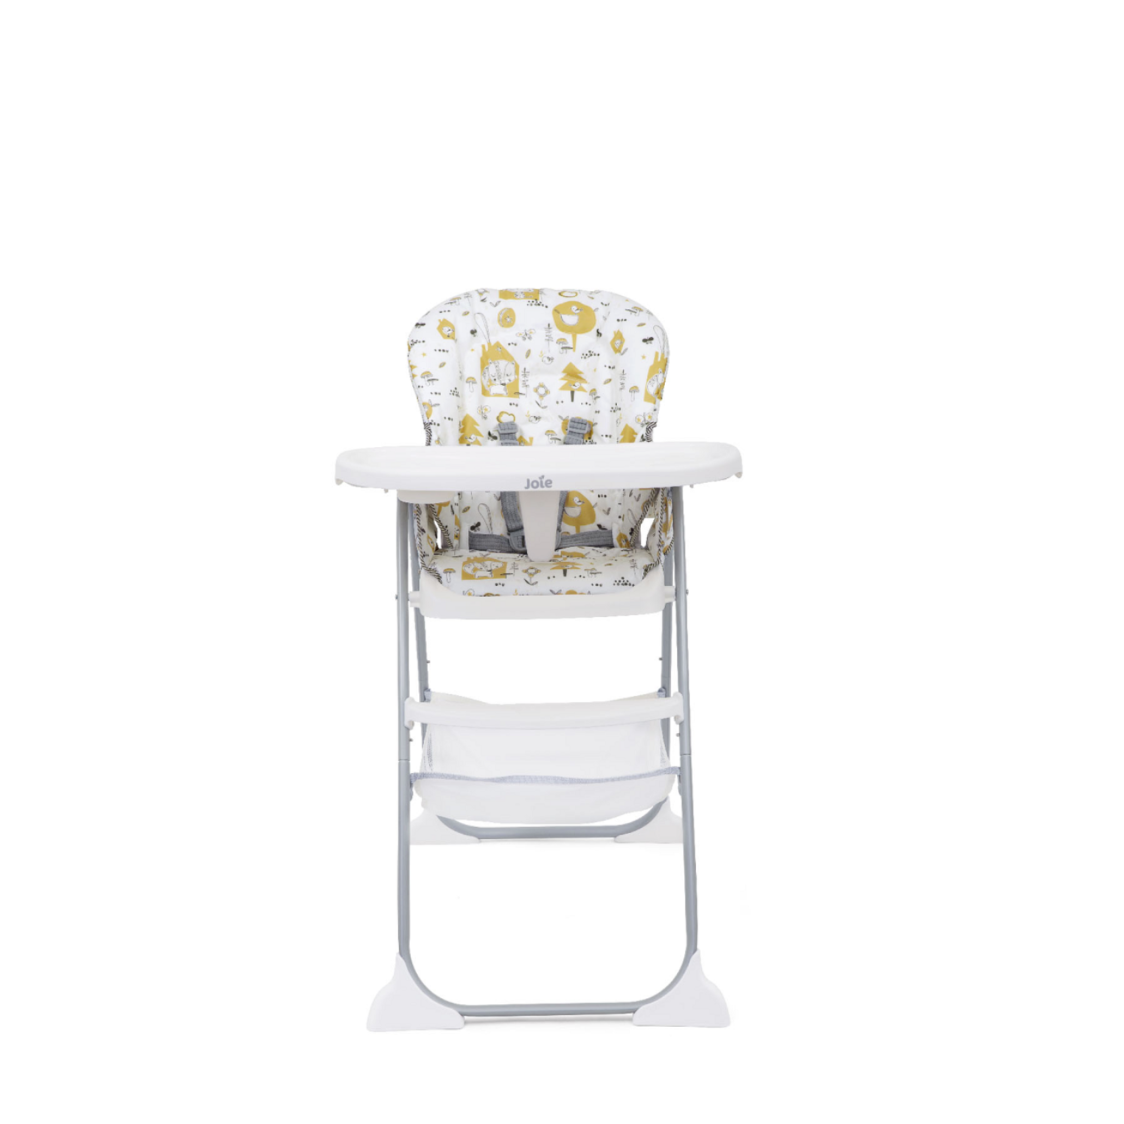 Joie Mimzy Snacker Cozy Space High Chair